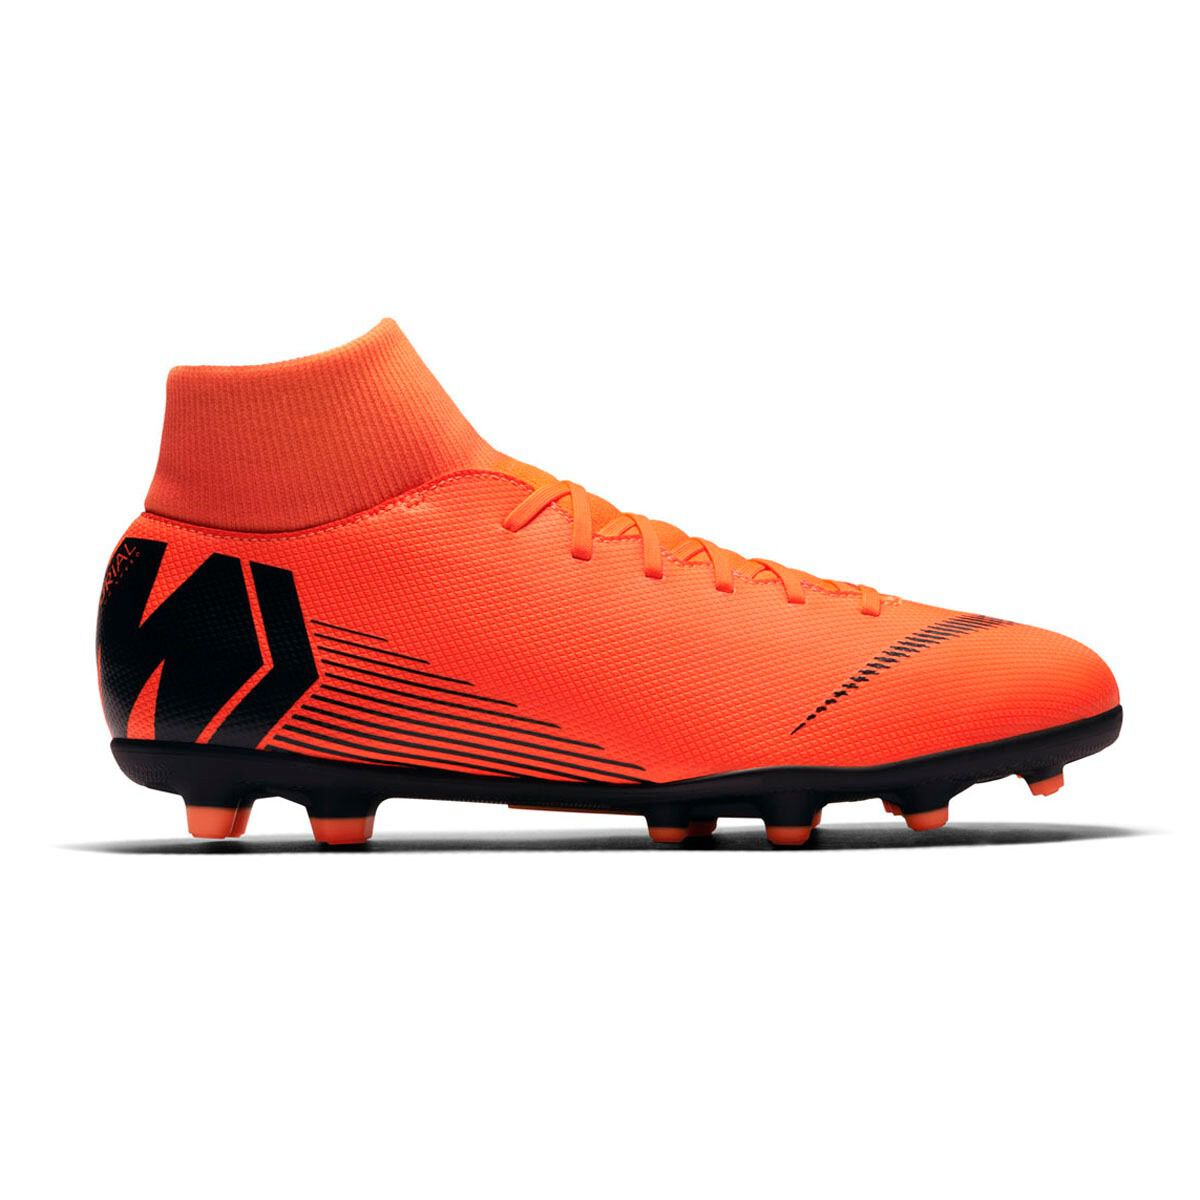  Nike men 's soccer shoes india boots Superfly 7 Club FG MG